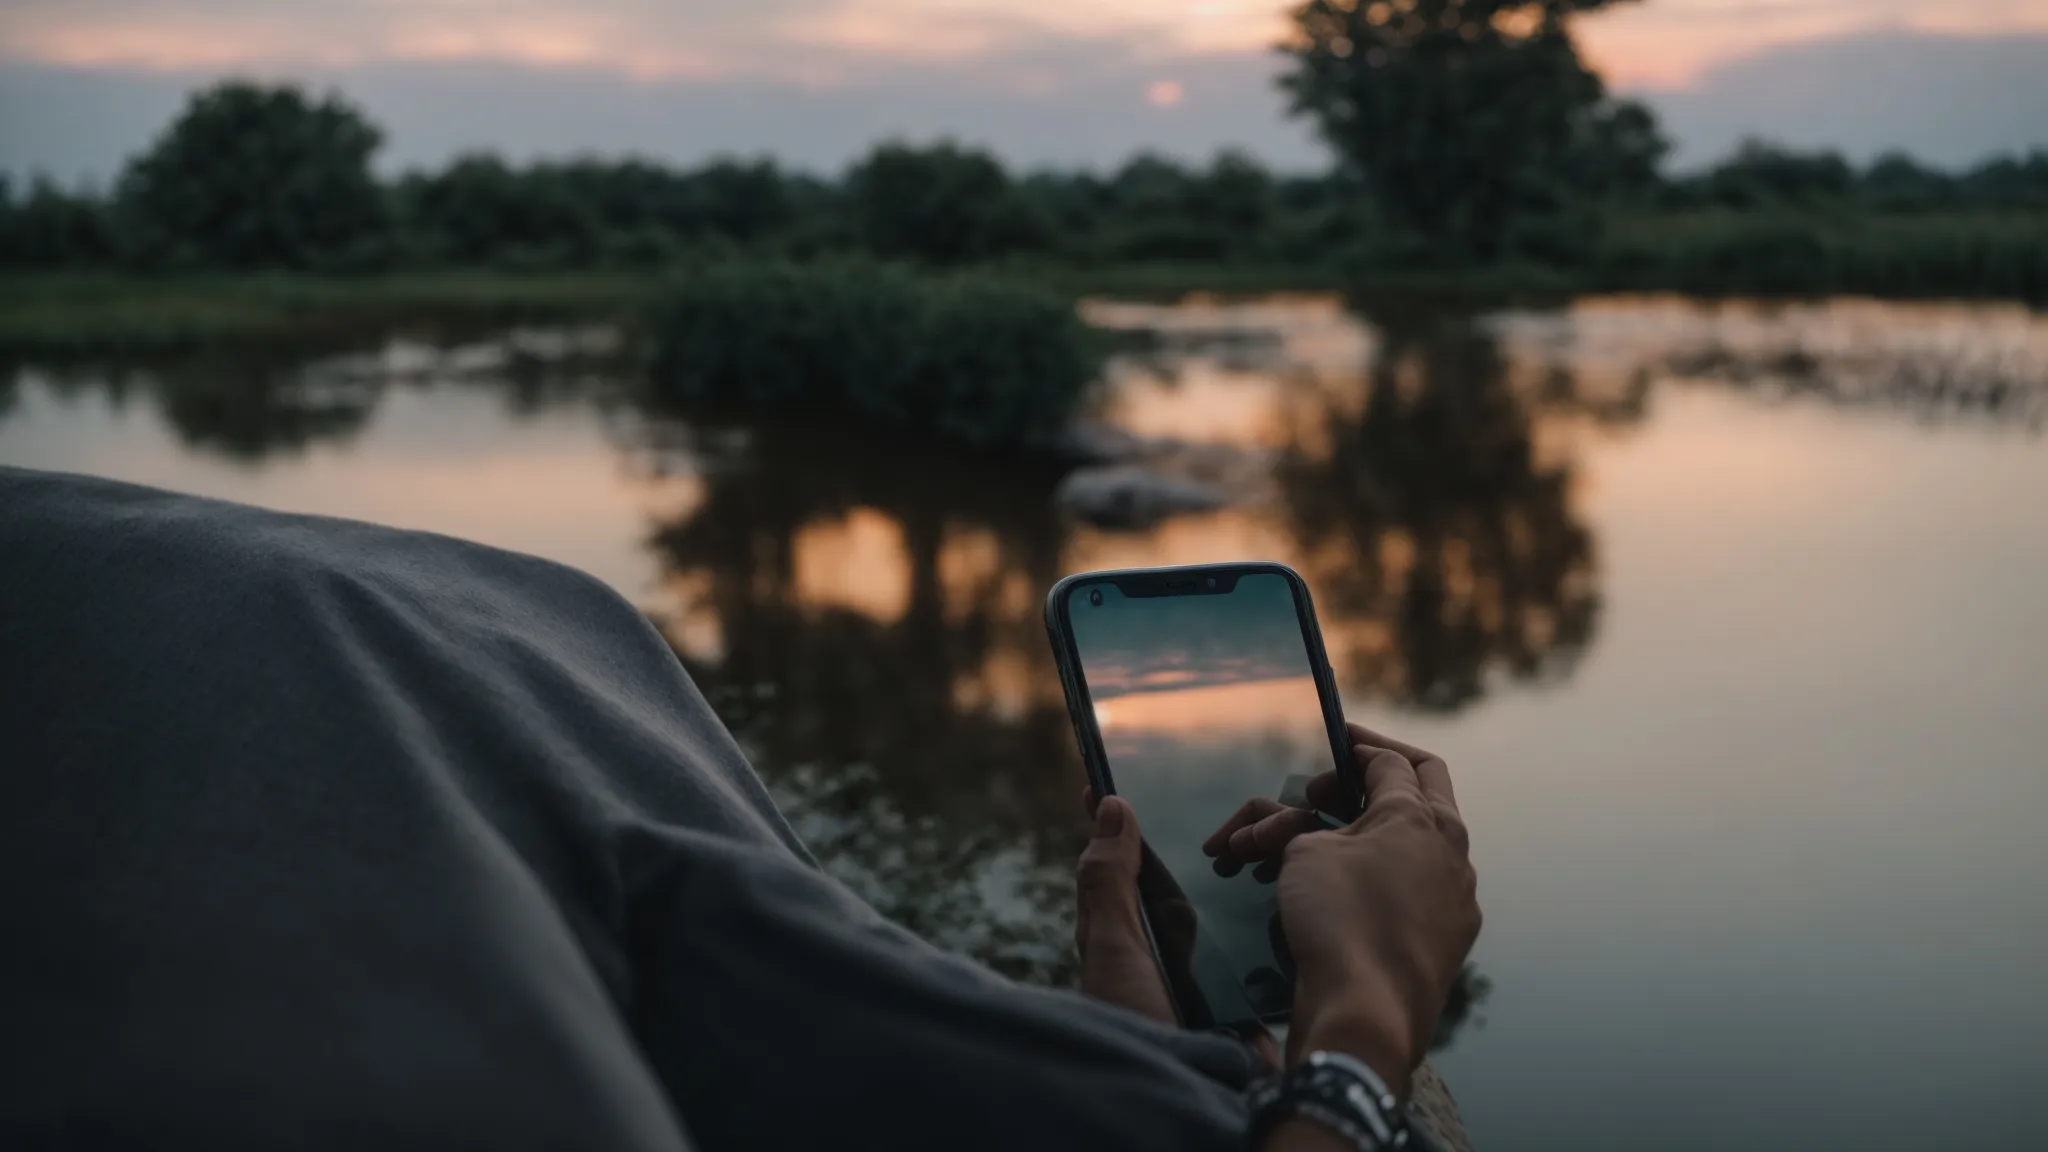 a person holding a phone, staring intently at the screen with a pond reflecting a serene sky in the background. They may be checking their voicemail or contact list.